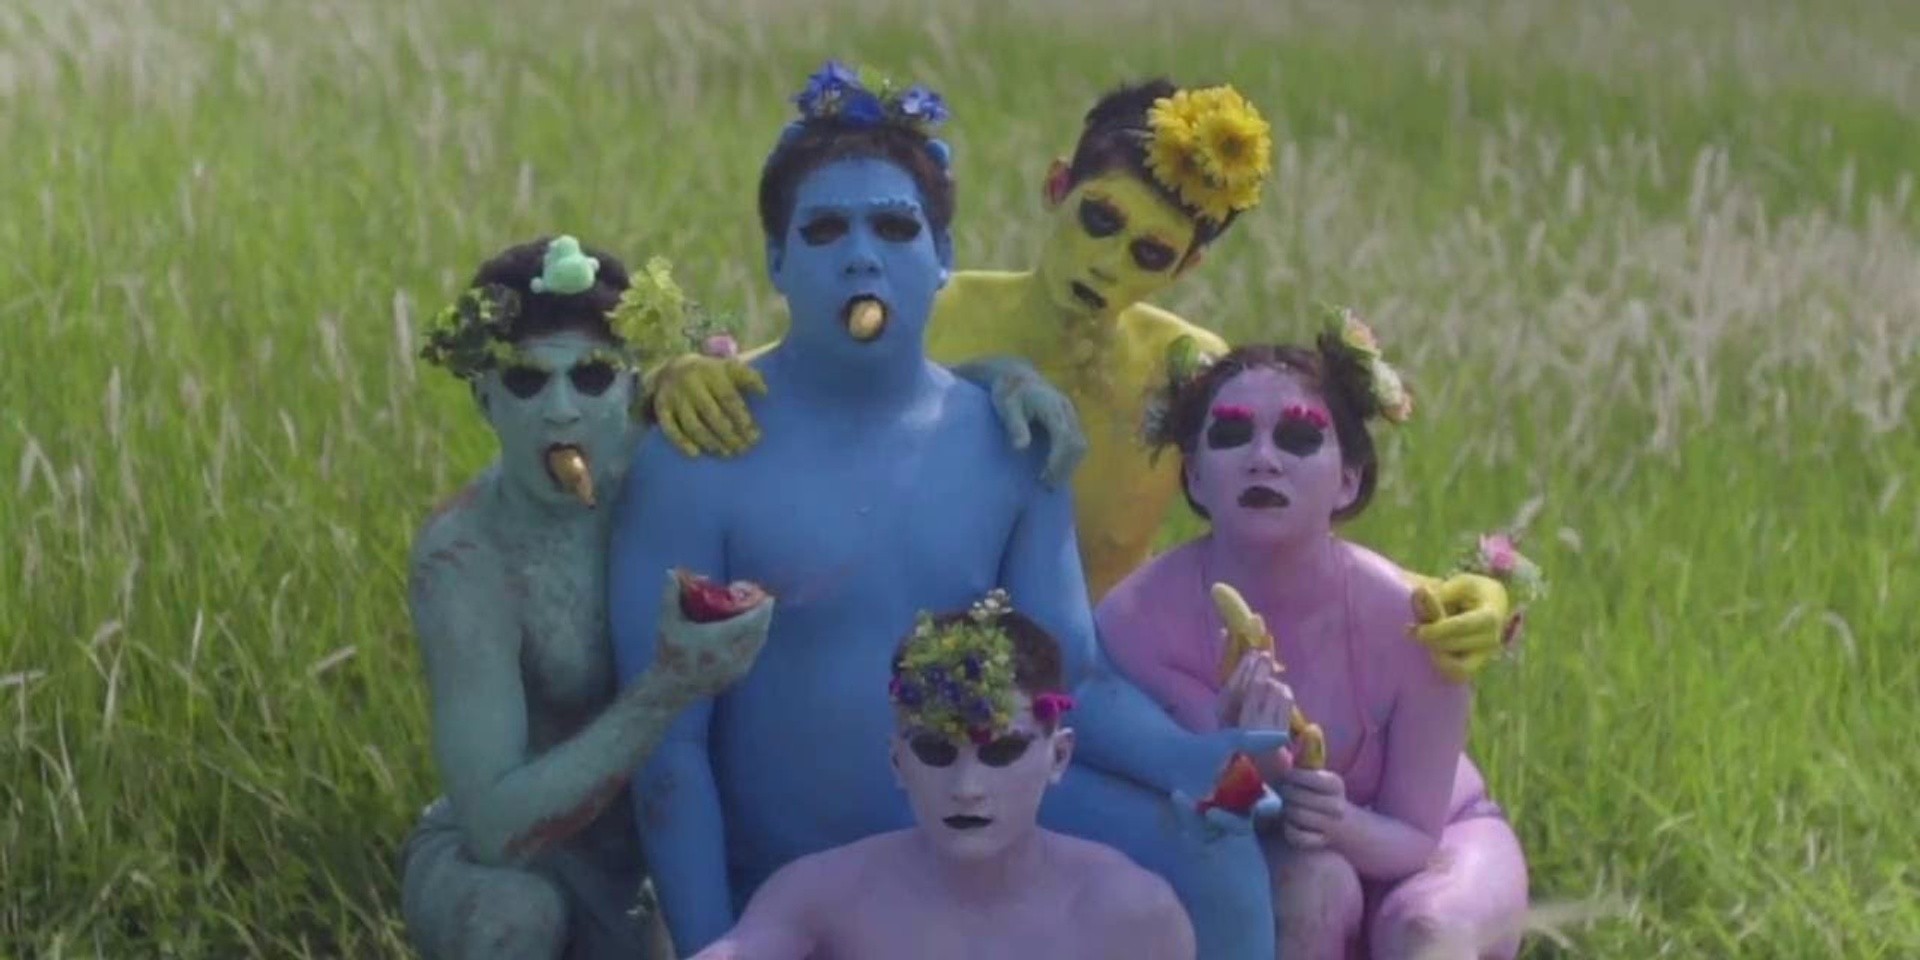 WATCH: Get lost in SUBSONIC EYE's bizarre, colourful dreamscape for '2daze'